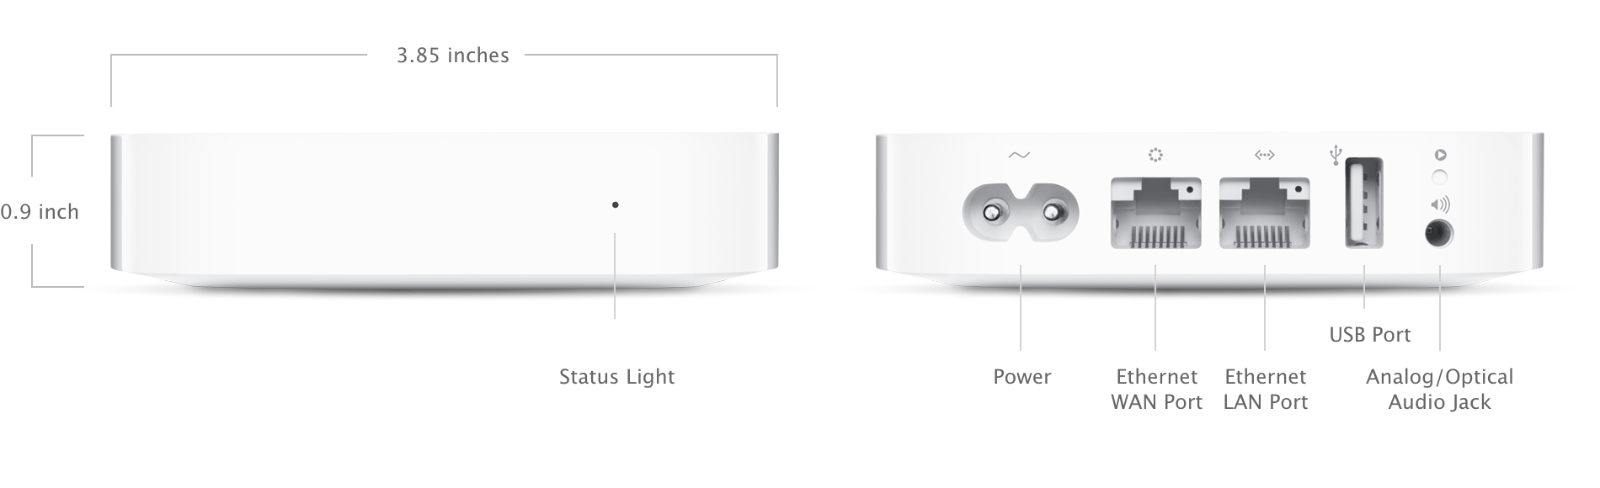 AirPort Express 802.11n (2nd Generation) - Technical Specifications